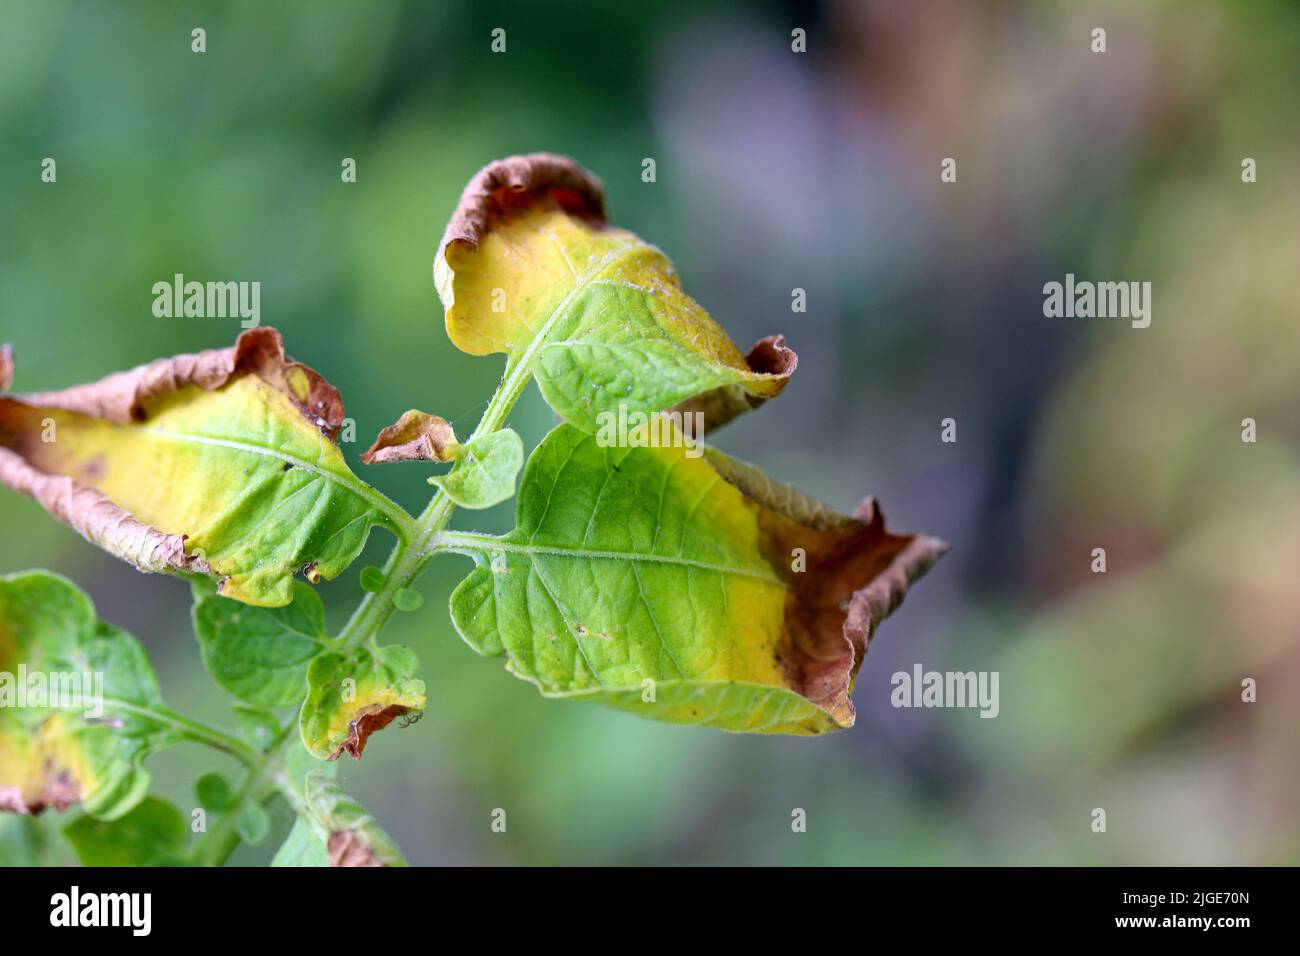 Symptoms of fungal infection of the disease on the potato leaf. Stock Photo